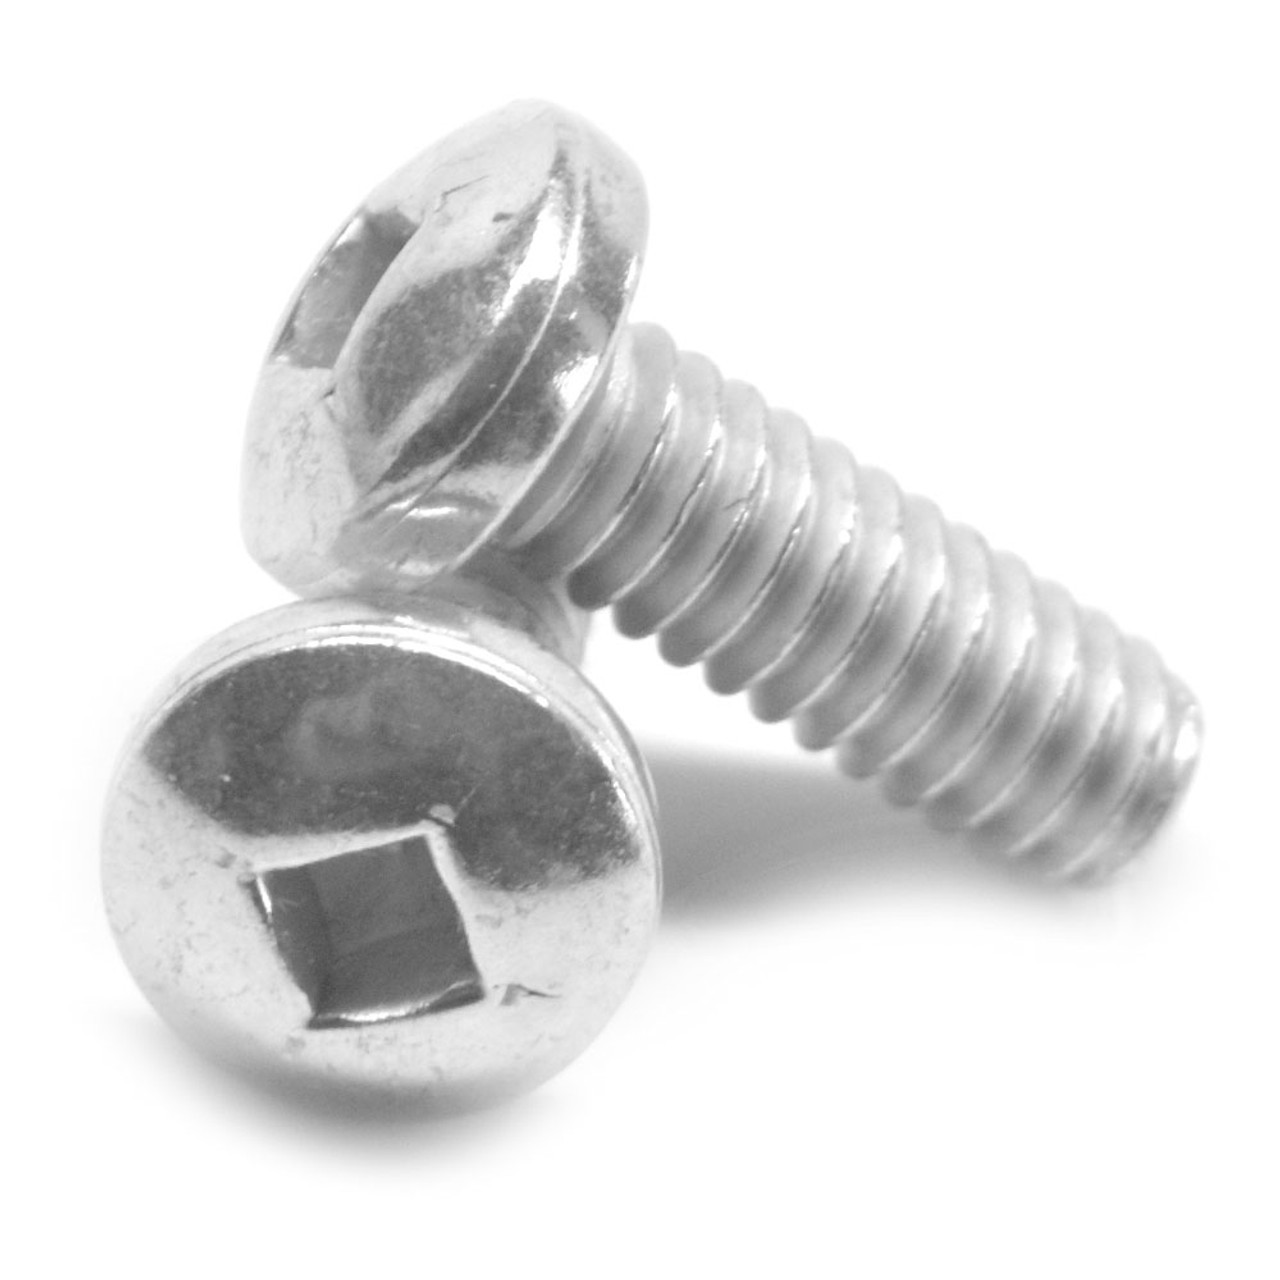 1/4"-20 x 3" (FT) Coarse Thread Machine Screw Square Drive Pan Head Stainless Steel 18-8